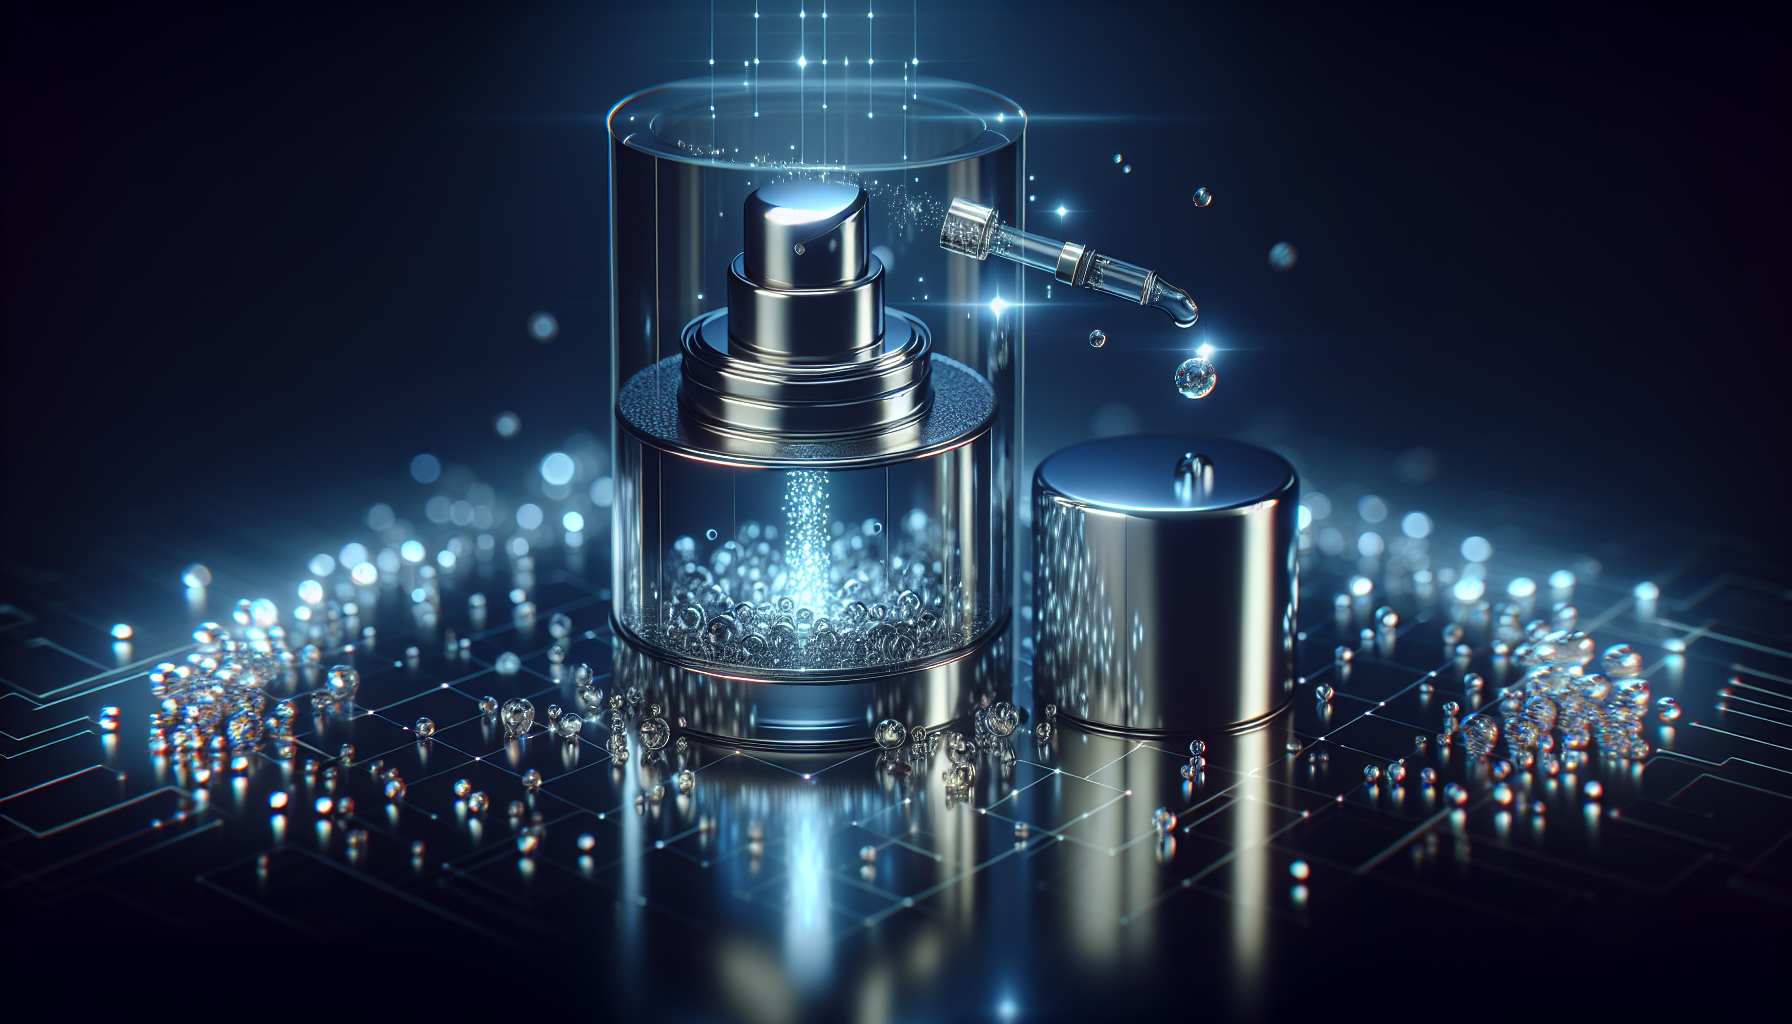 An Advanced Skincare Product Typically Incorporates Innovative Ingredients, Cutting-edge Technology, And Often Targets Specific Skin Concerns With A Scientifically-backed Approach. Here Are Some Examples Of What Might Constitute An Advanced Skincare Product: